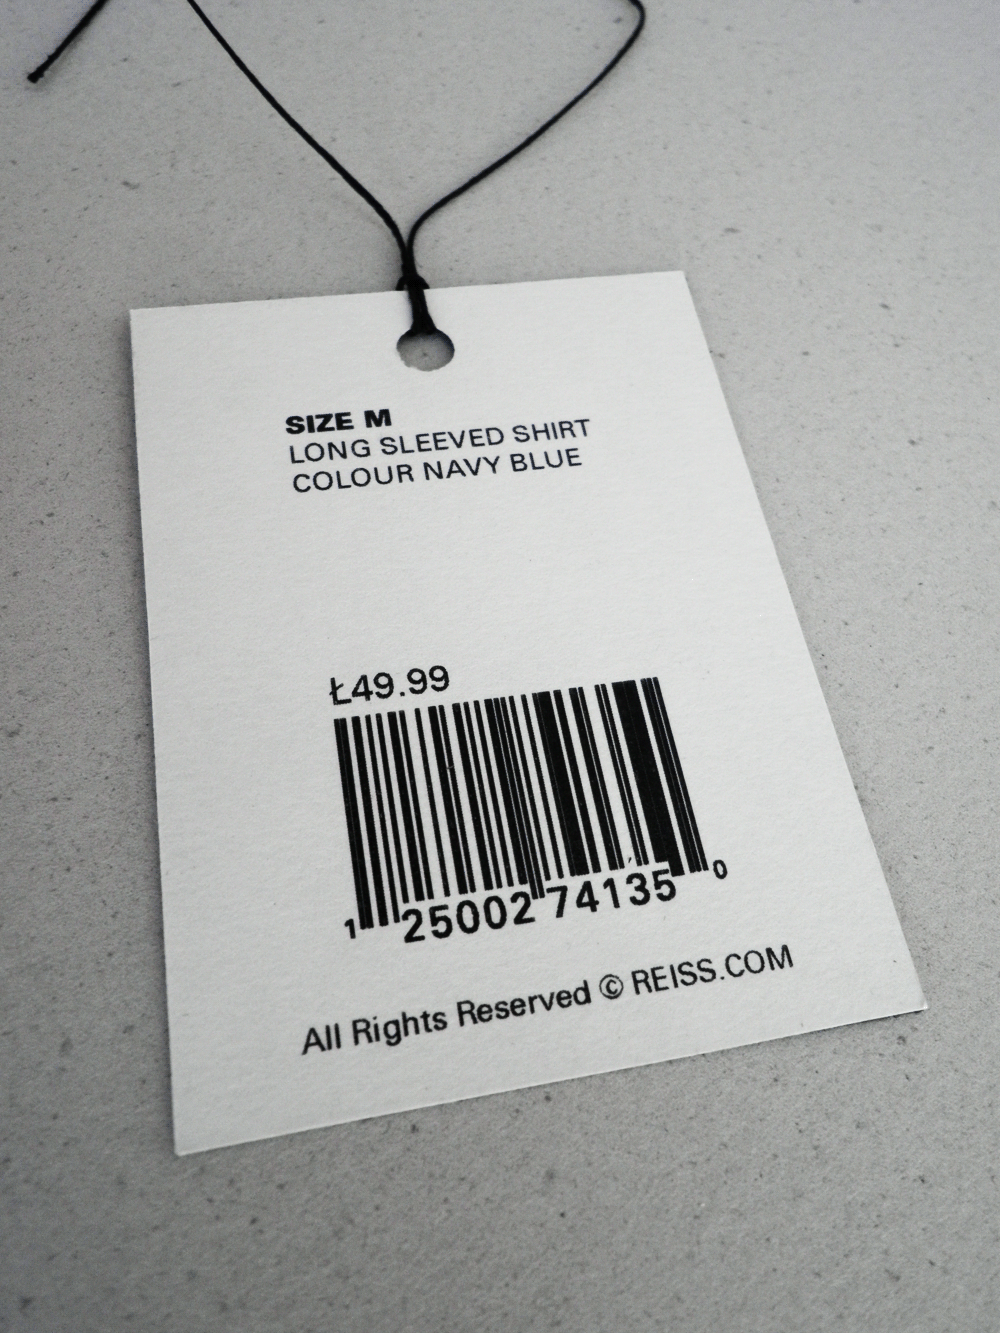 reiss clothes store identity guidelines